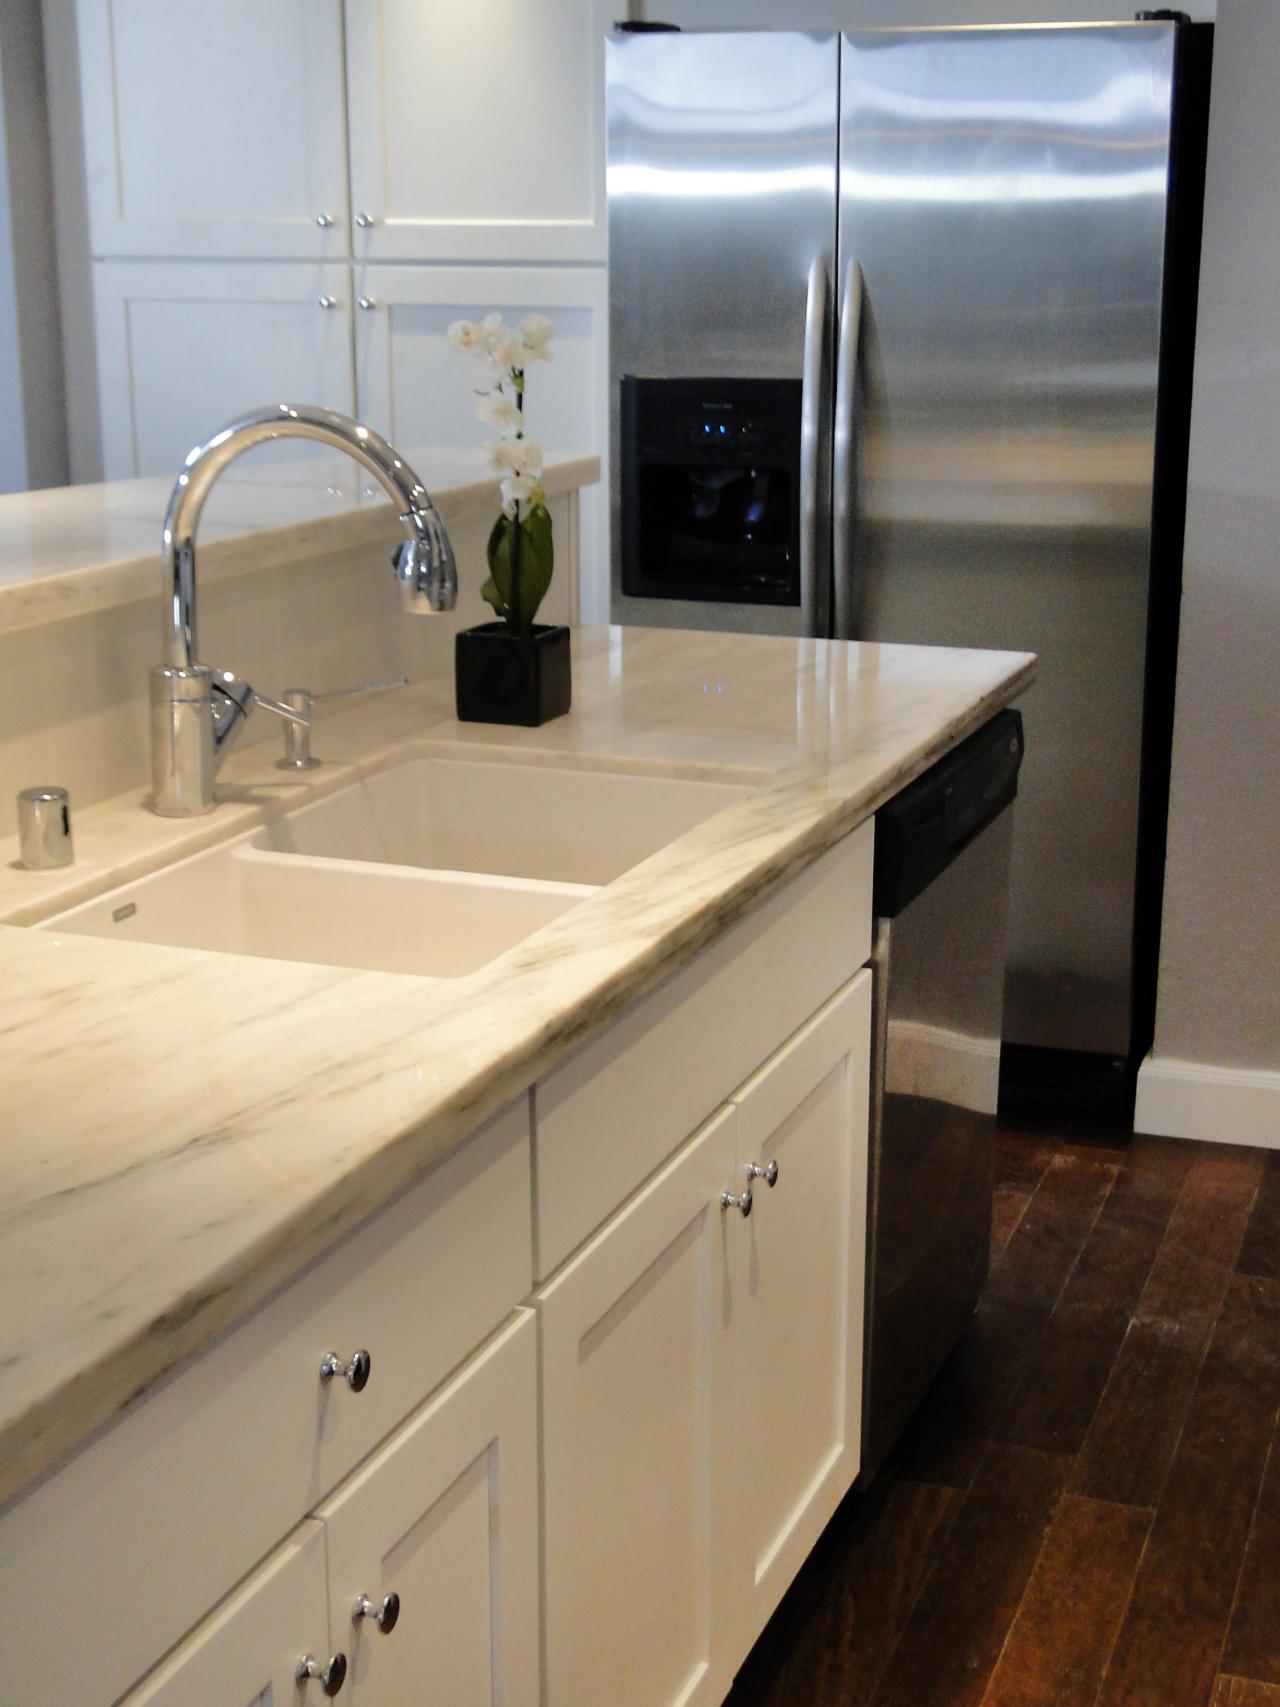 How To Care For Solid Surface Countertops Diy